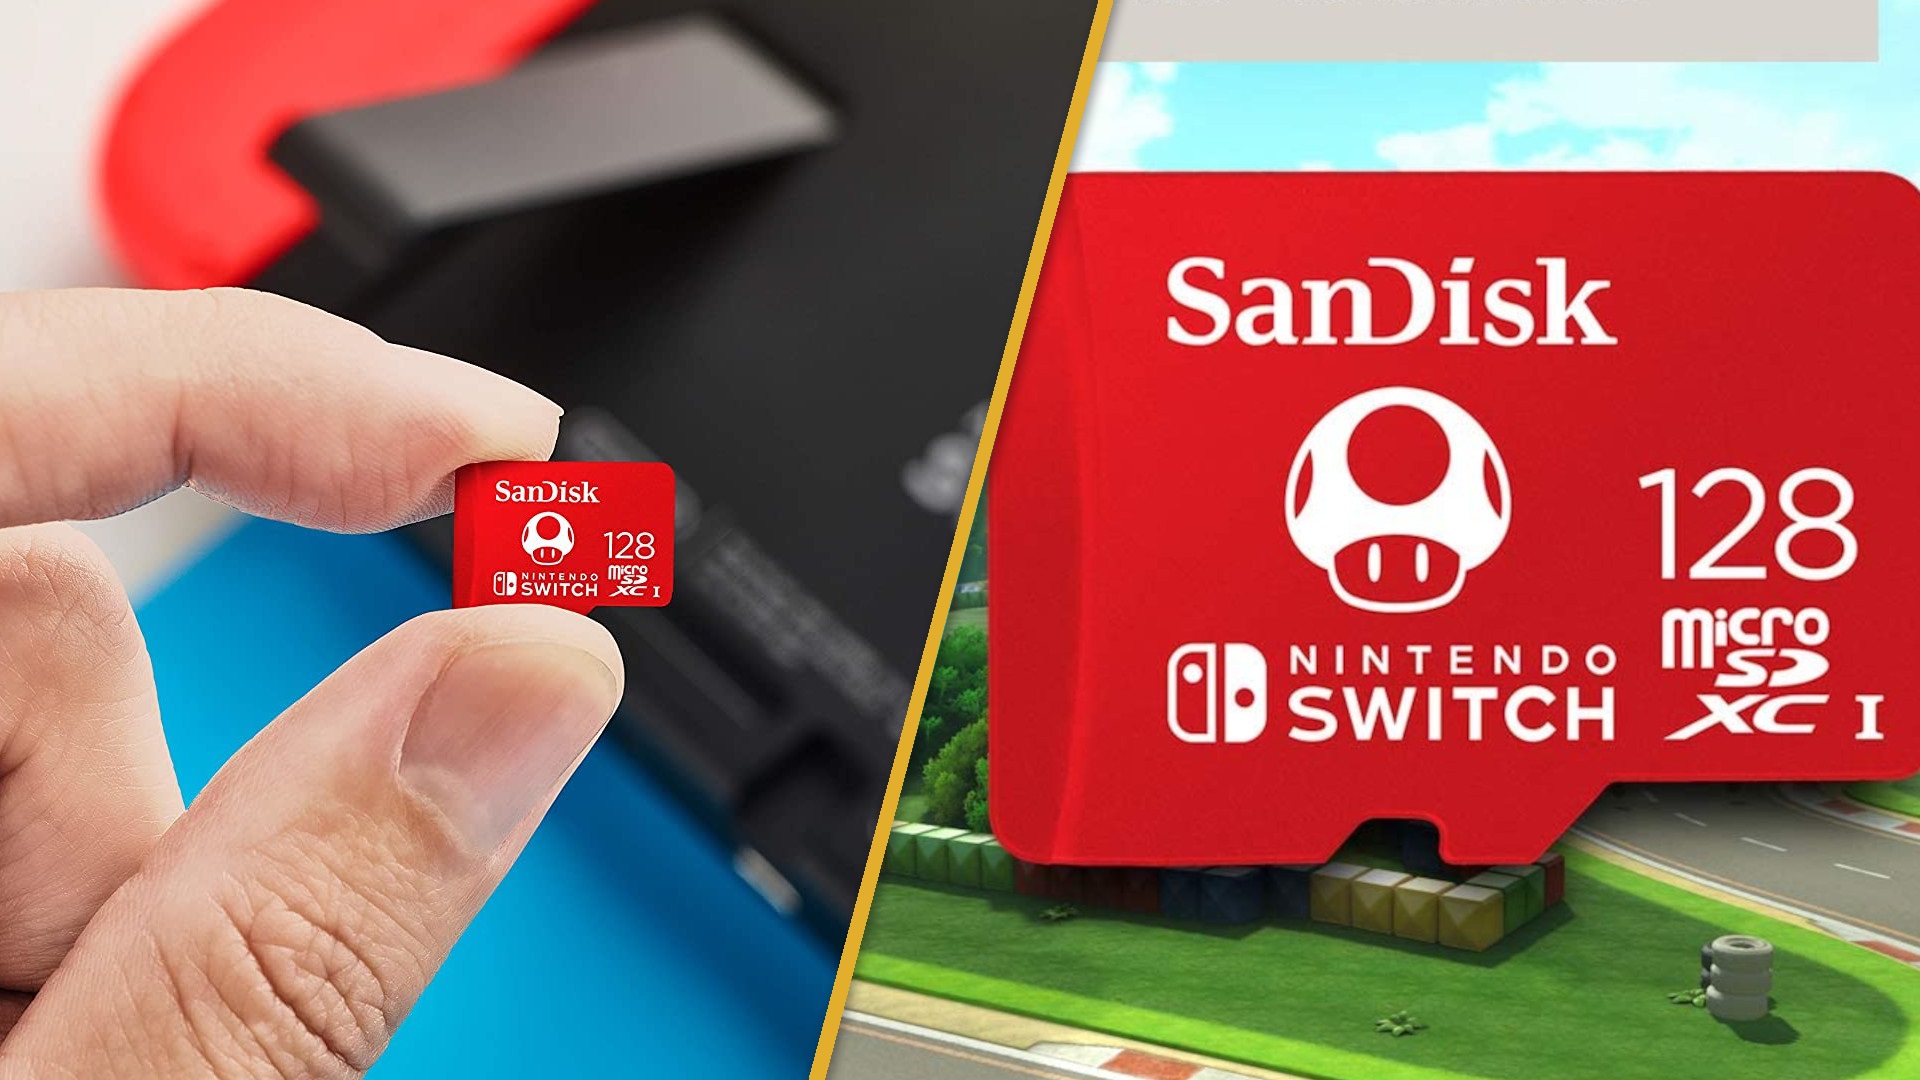 SanDisk 128GB microSDXC Card for the Nintendo Switch - 2-Pack 